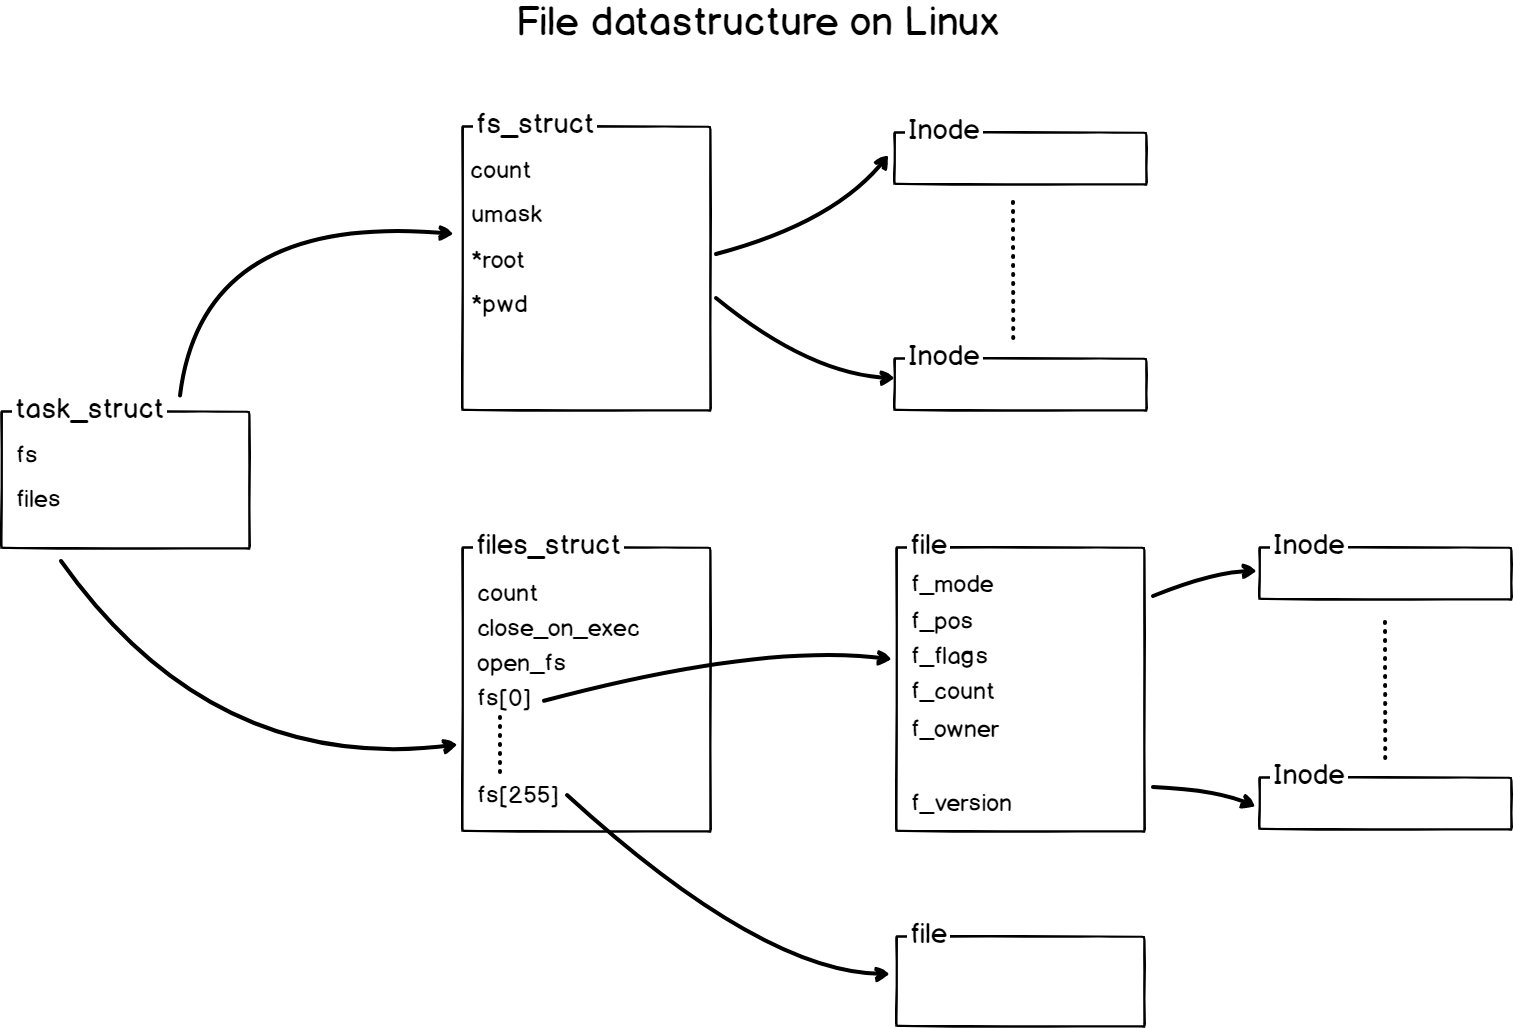 File datastructure on Linux